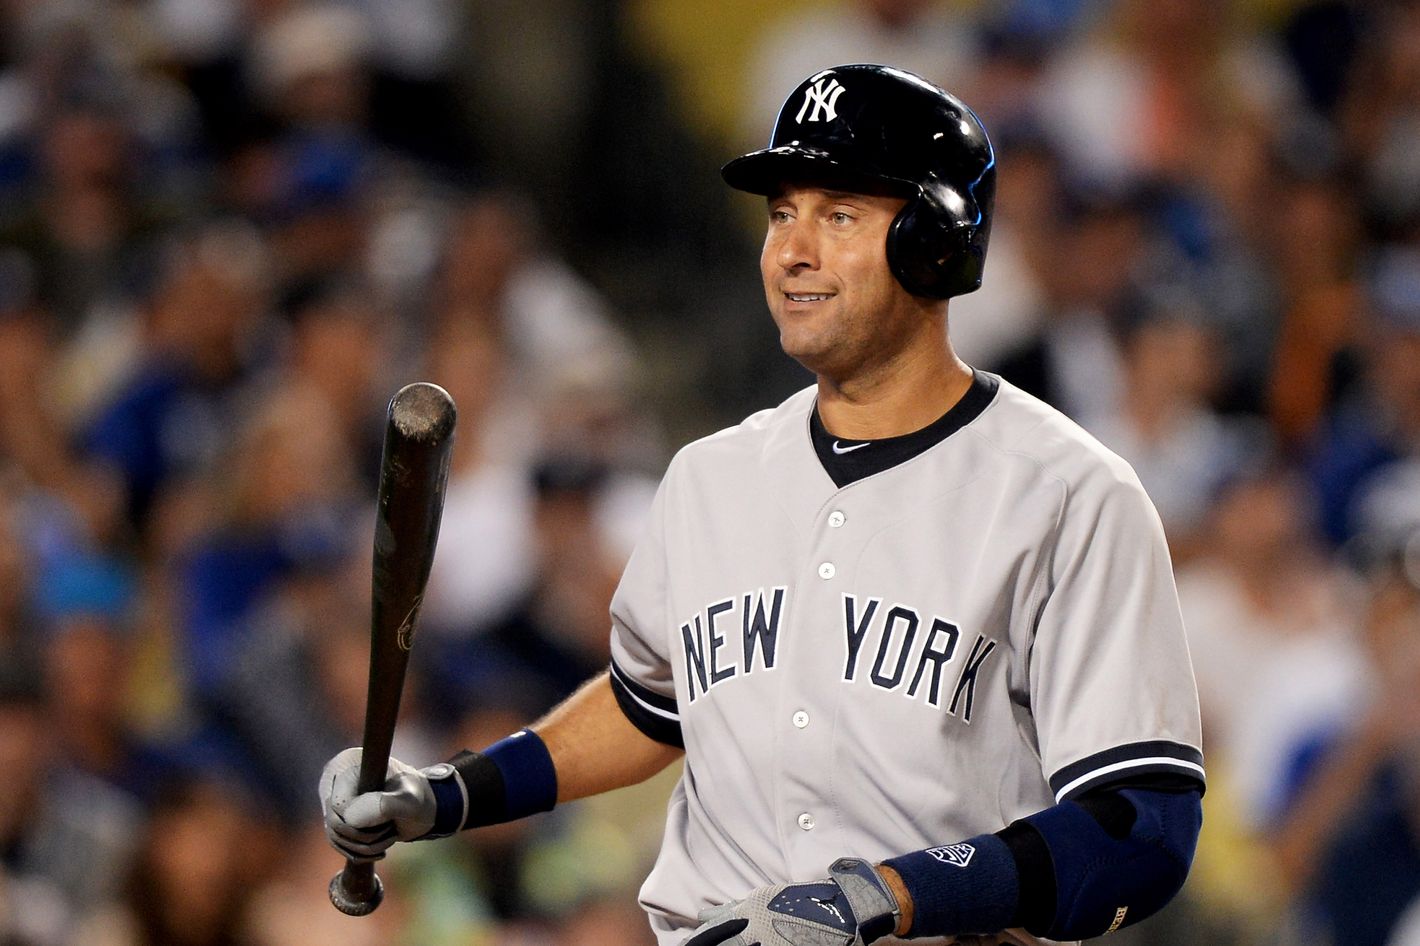 Derek Jeter Plays Final Game at Fenway Park - The New York Times